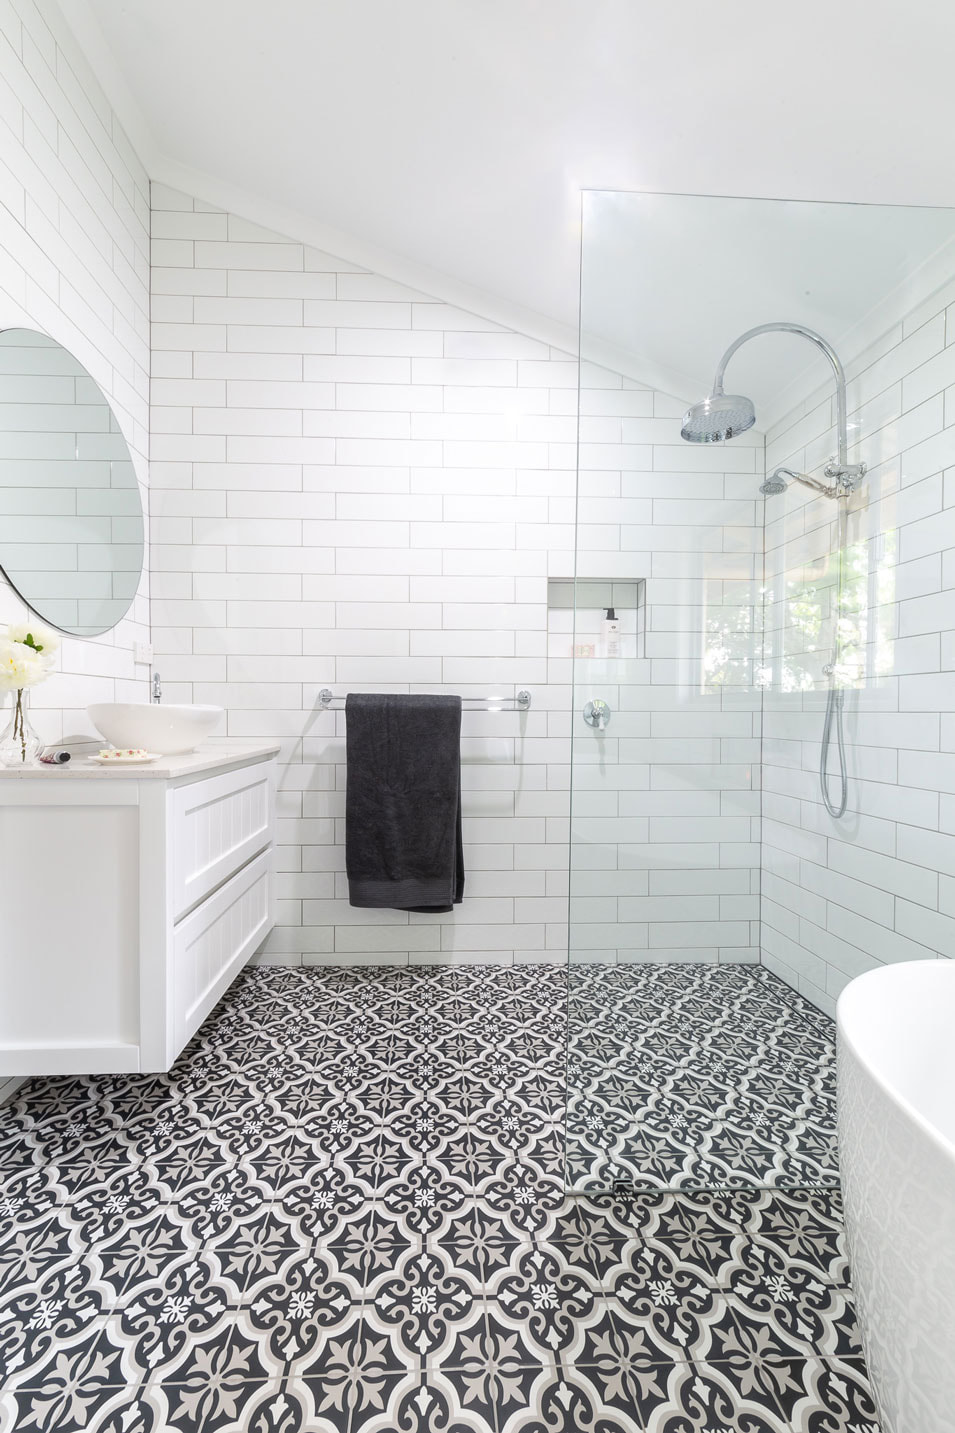 Bathroom remodel in Lismore by Northern RIvers Bathroom Renovations. Country cottage style with white subway walls using light grey grout, a white and black encaustic floor tile, hampton wall hung draw vanity, traditional style tapware and free standing bath.